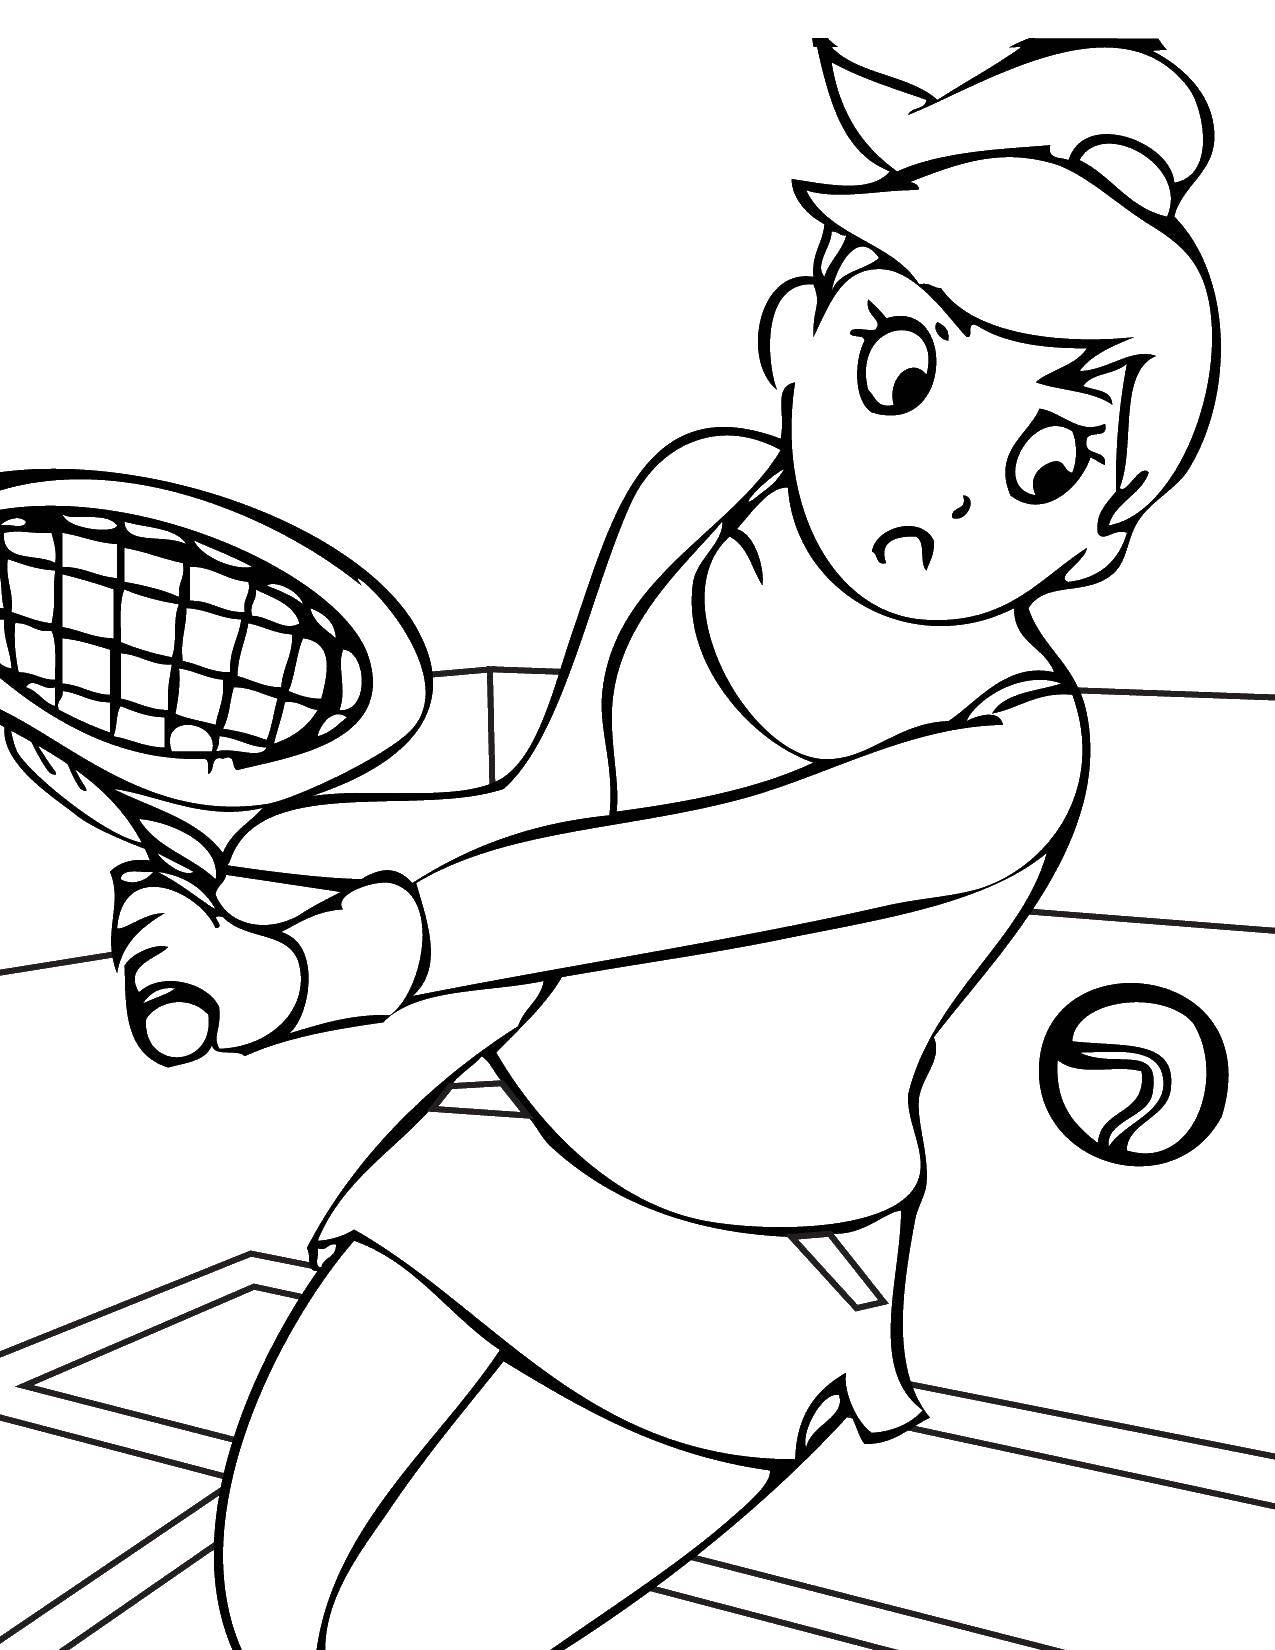 Coloring Tennis player. Category Sports. Tags:  Sports, tennis, racquet.